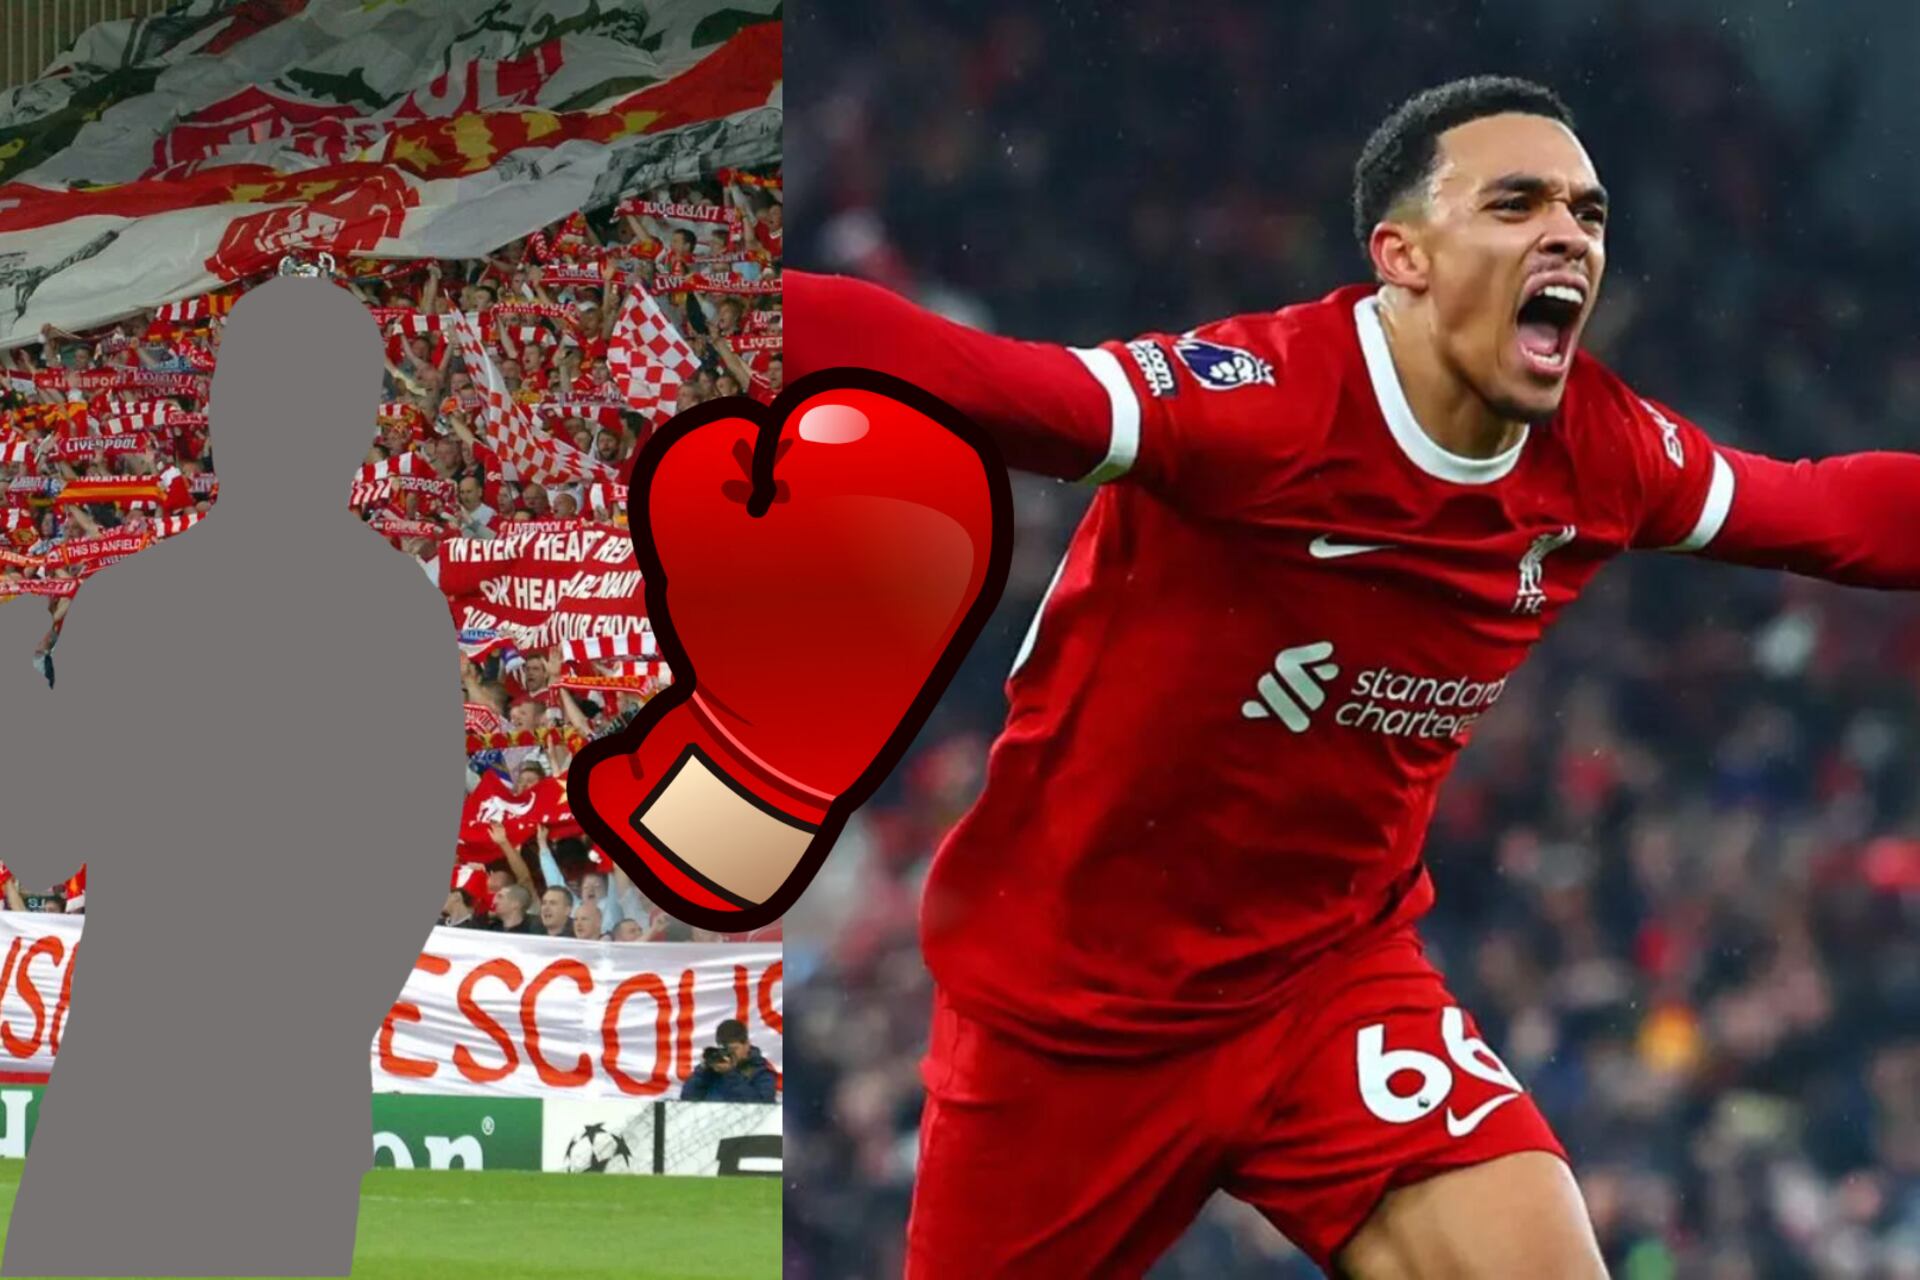 A Liverpool legend uses Trent Alexander-Arnold' shirt during boxing training